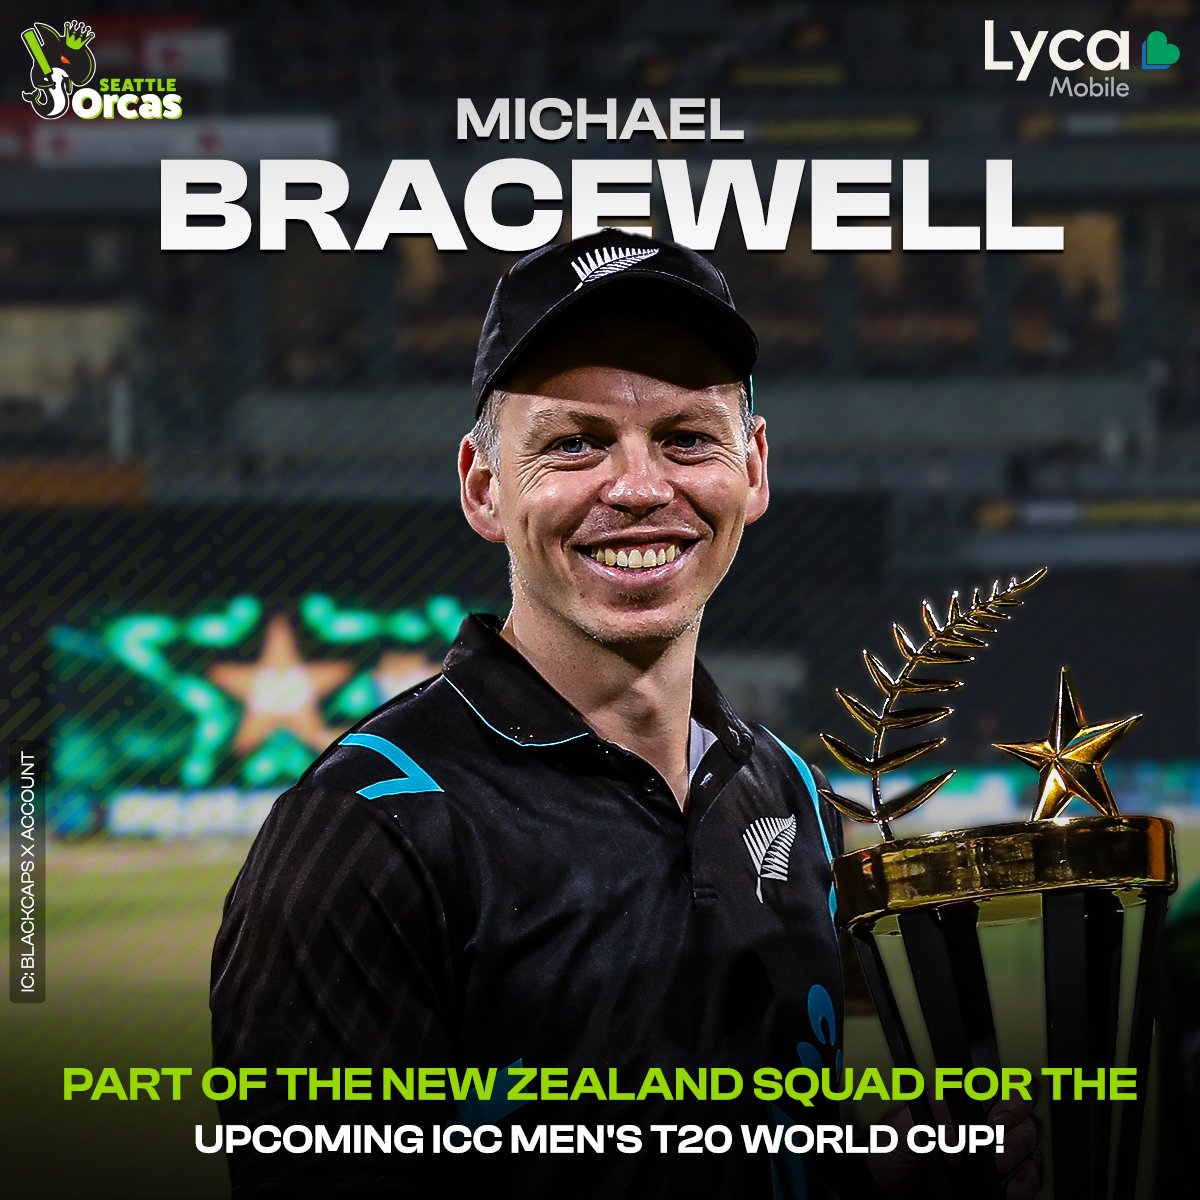 Fresh off leading the Kiwis to a power-packed performance in 🇵🇰, Michael Bracewell has his next 🎯 locked!  

Get ready to witness our very own all-rounder in the 🌴 & 🇺🇸, during the ICC Men's #T20WorldCup 😍 

#SeattleOrcas #MajorLeagueCricket #PodSquad